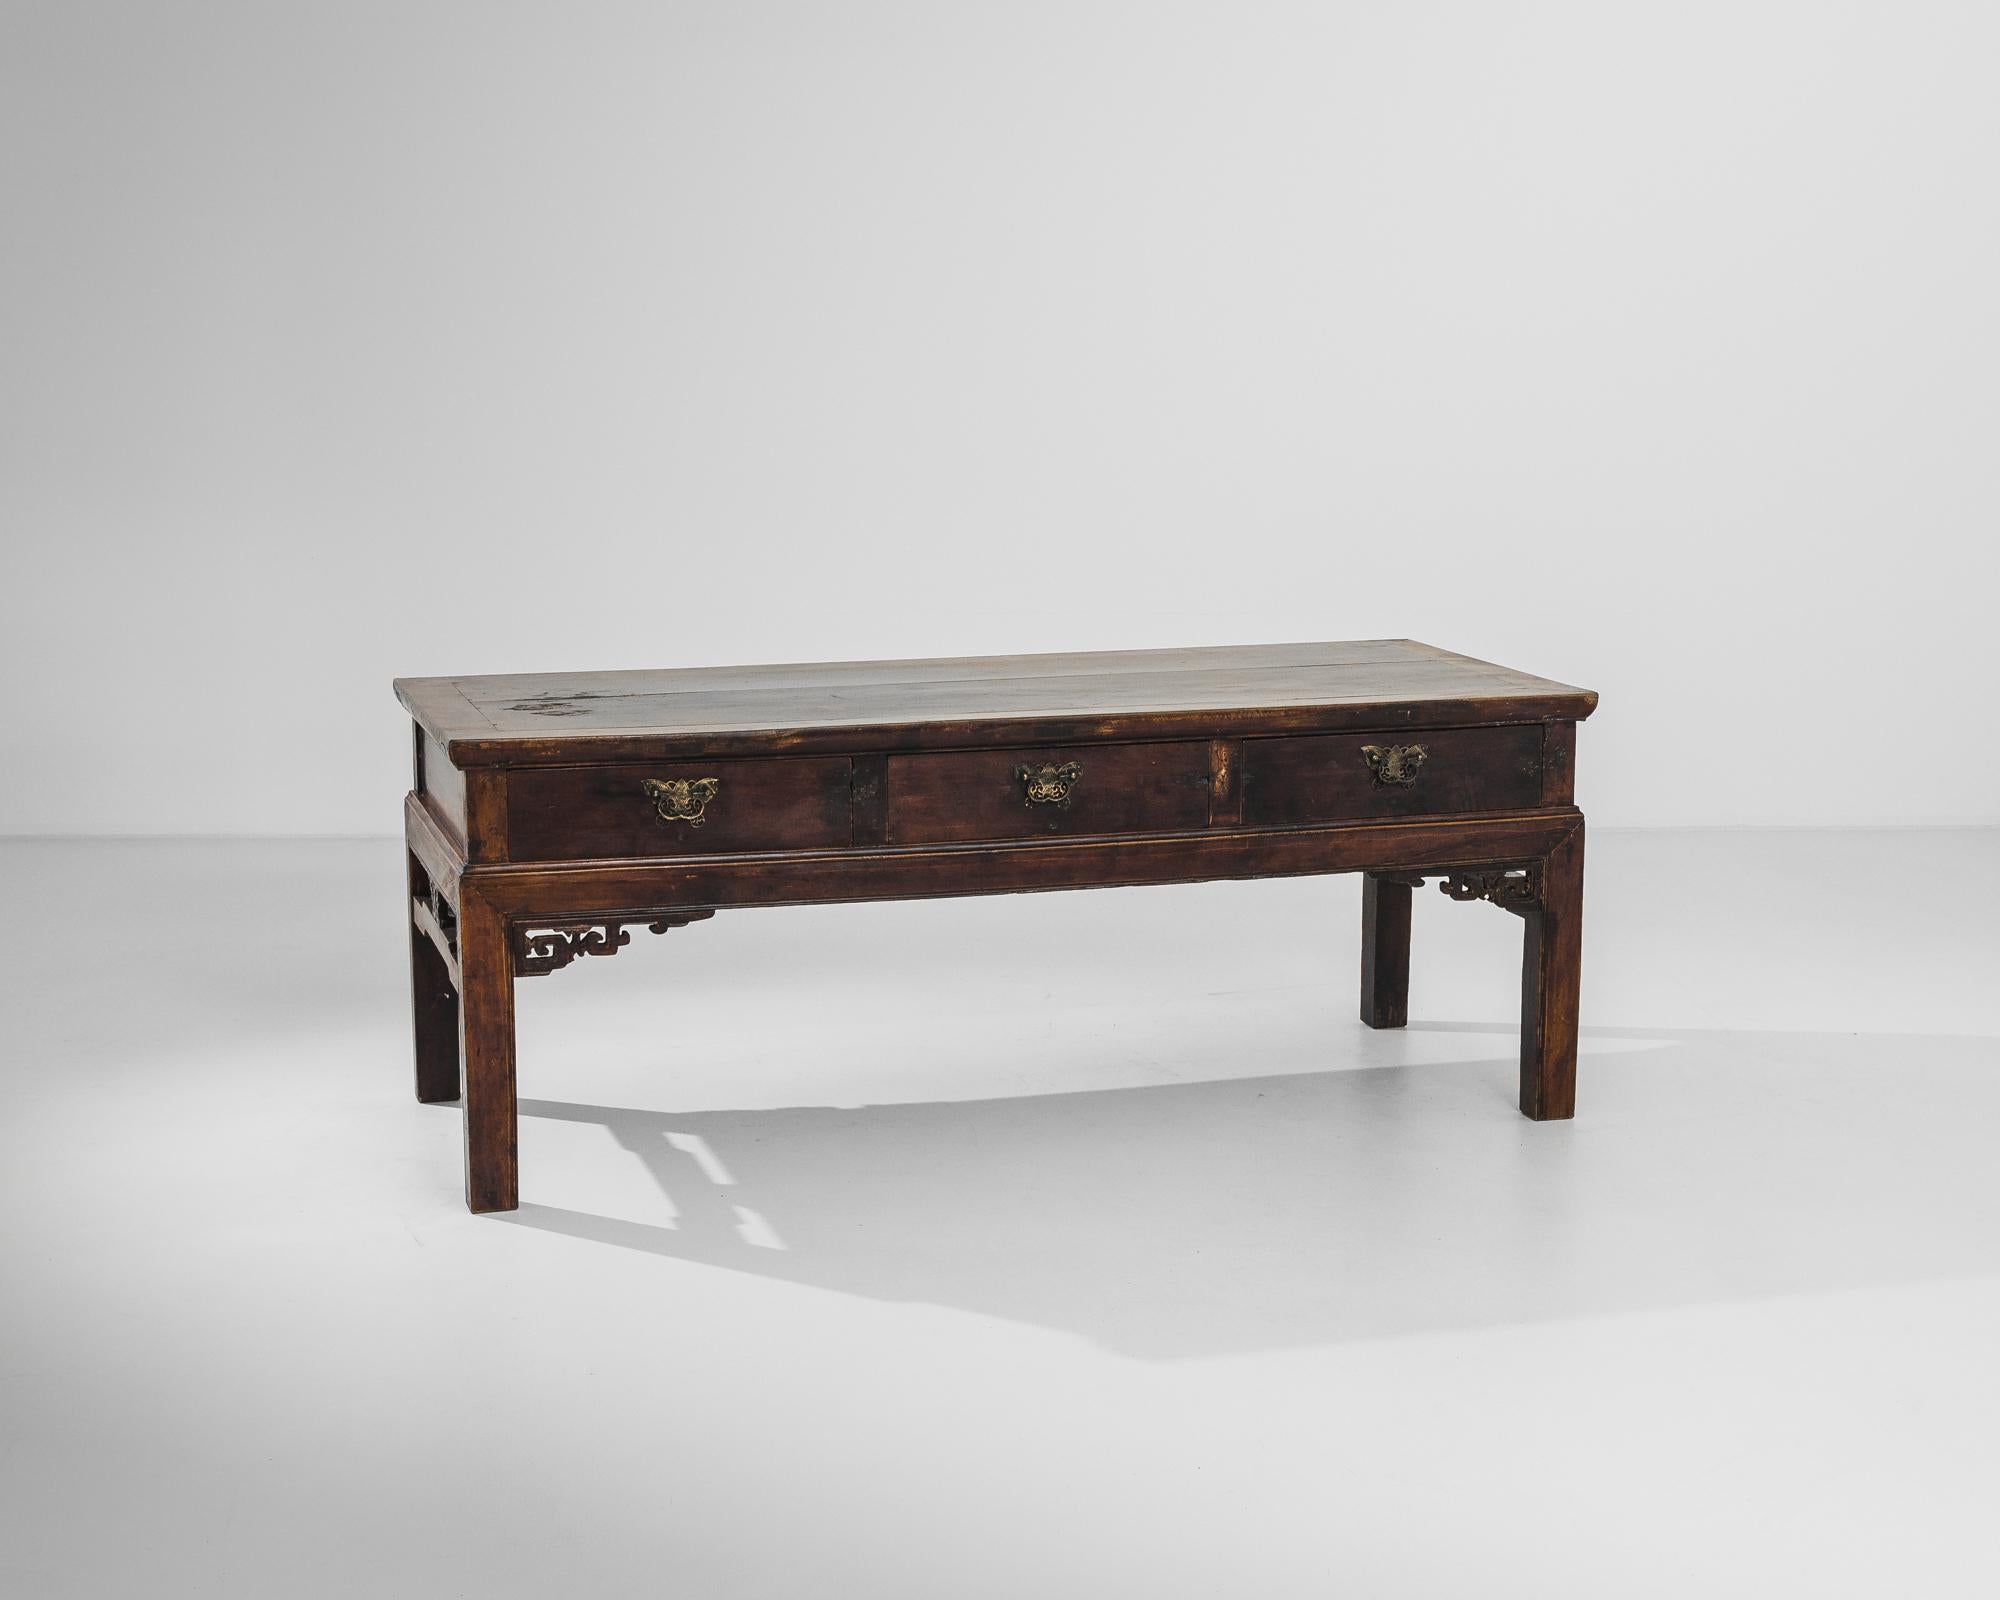 An occasional table from China, produced circa 1900. A charming antique table that updates ancient techniques and styles for the twentieth century. From details such as the meander patterns serving a flamboyant buttress, to the bumblebee-moth